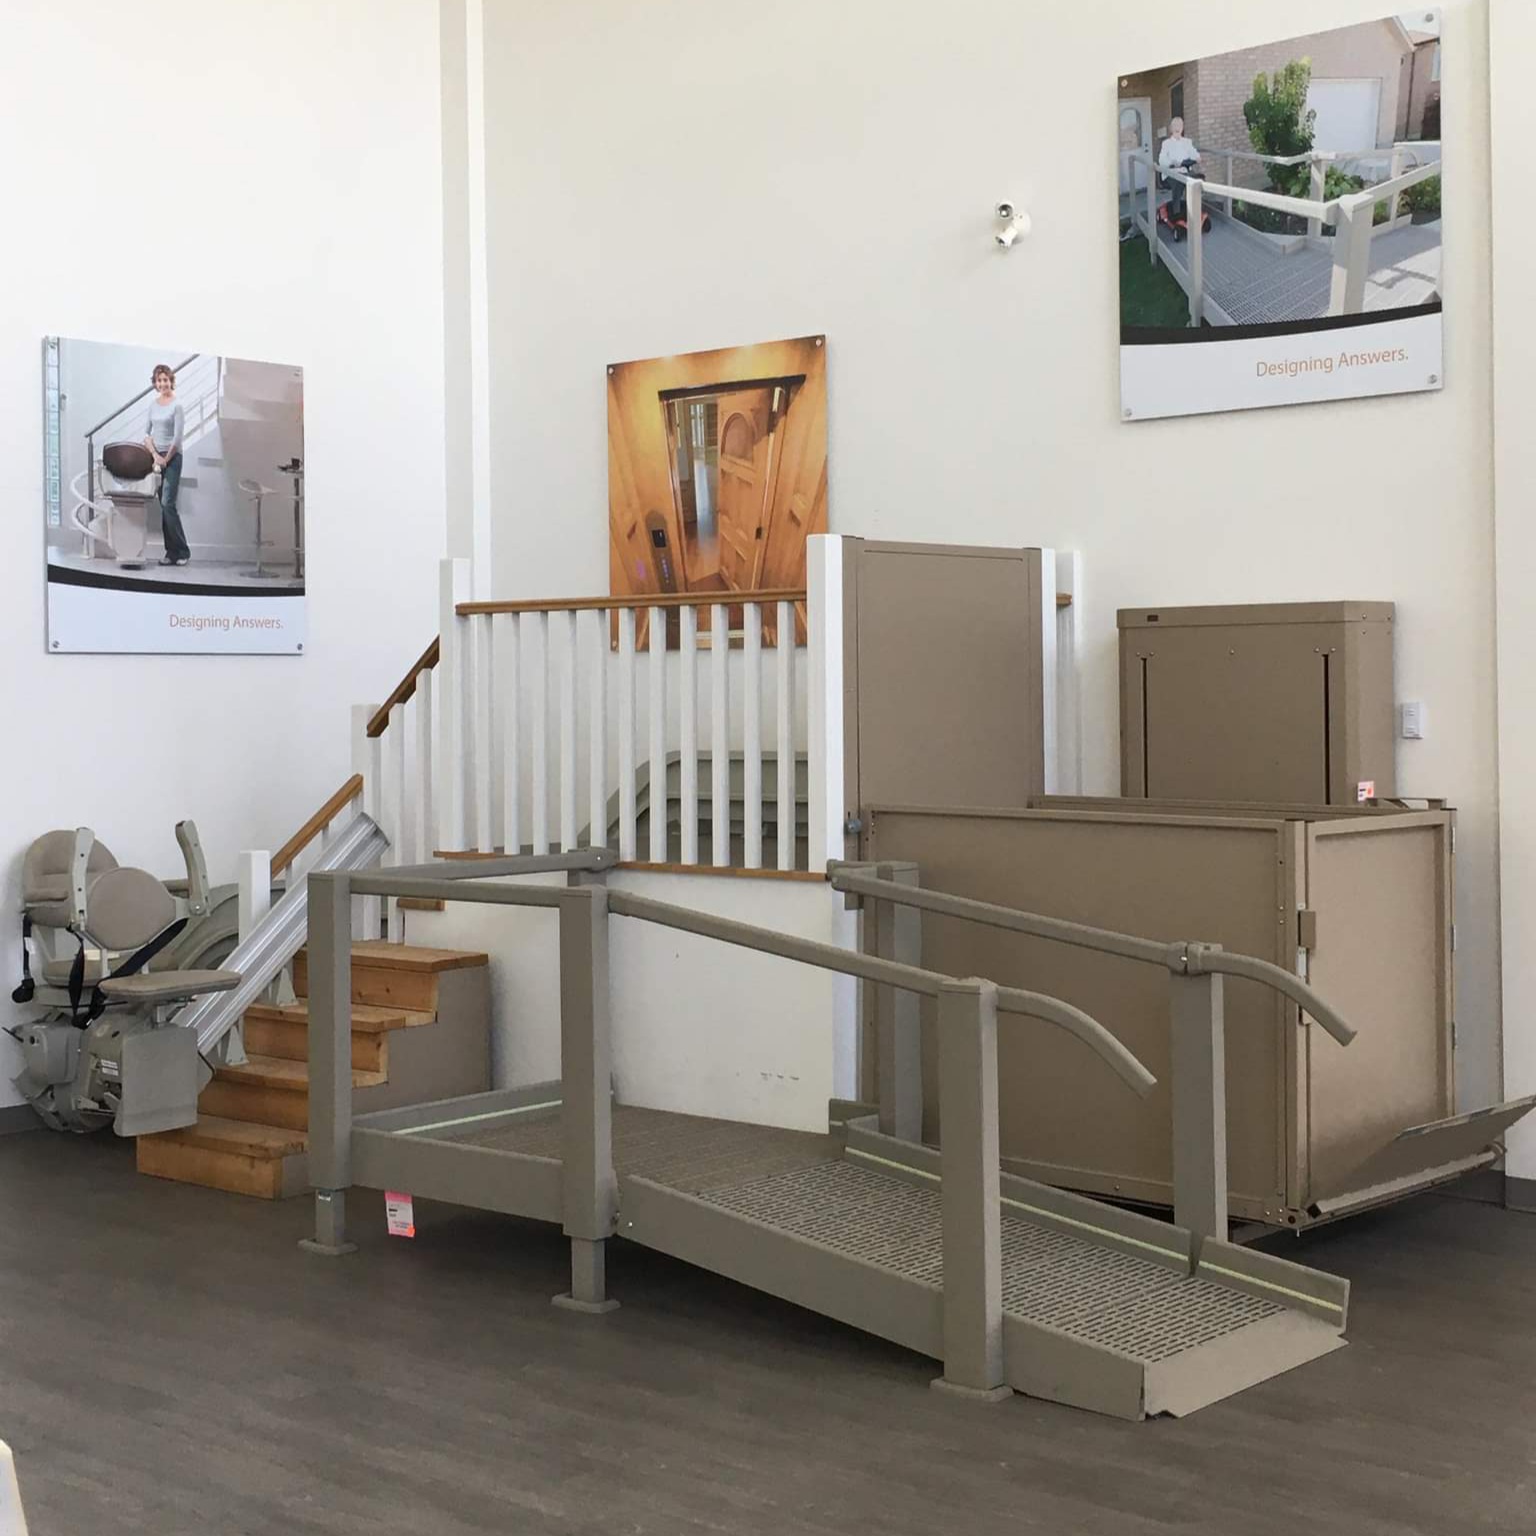 Vancouver stairlift, ramp, and vertical platform lift displays in showroom